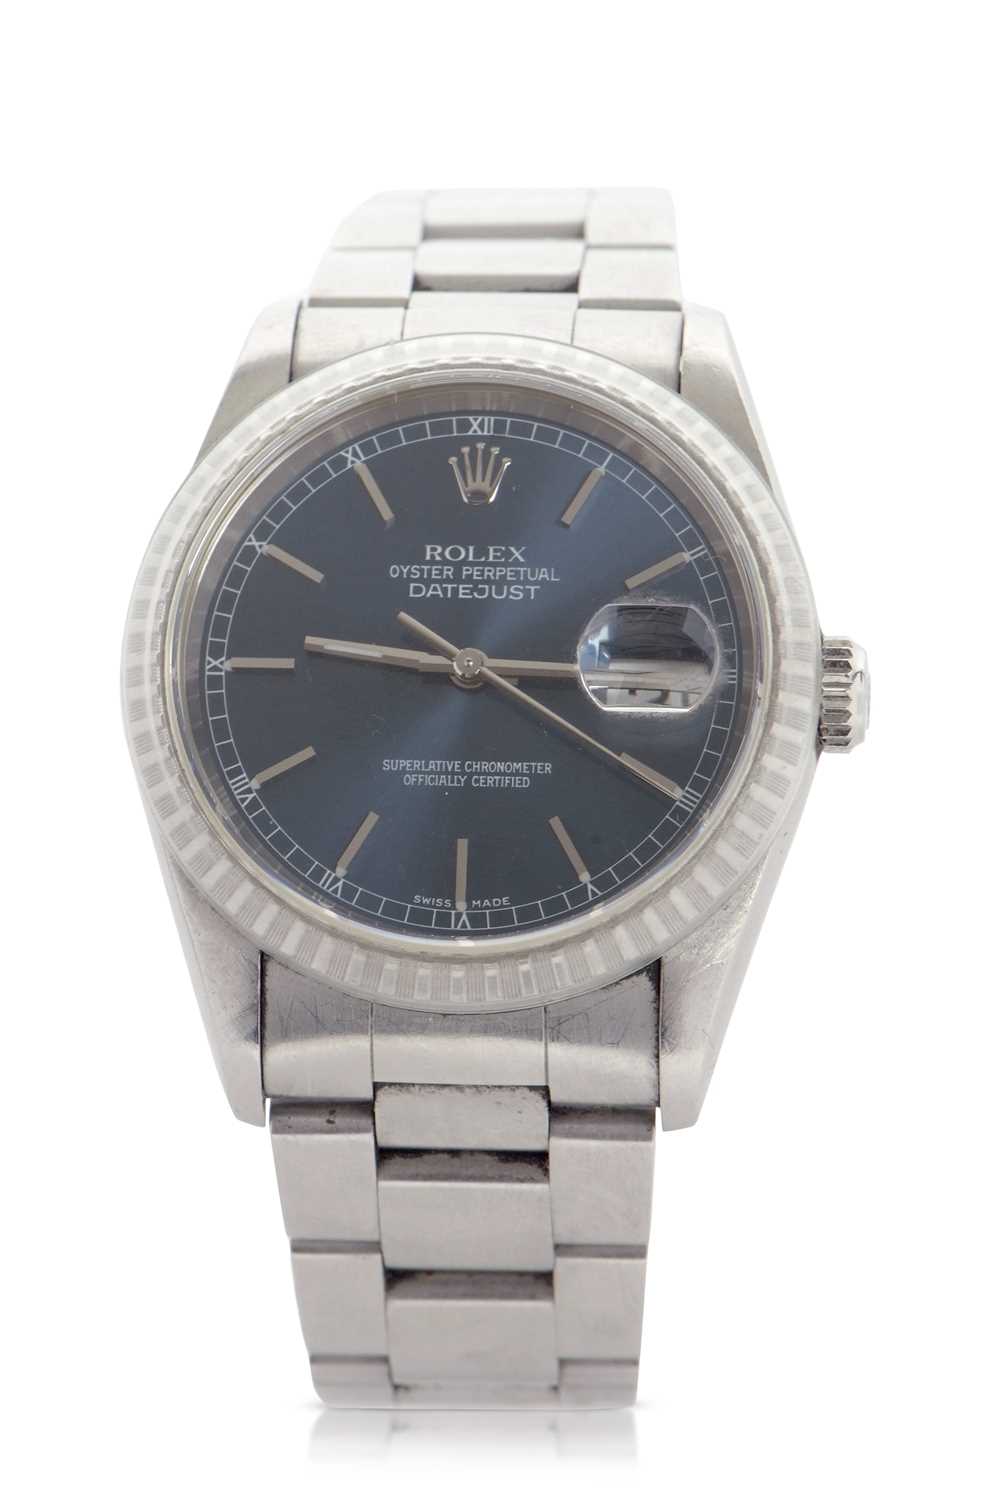 A gents Rolex Datejust 36, reference: 16220, serial: D475061, the watch has a blue dial along with a